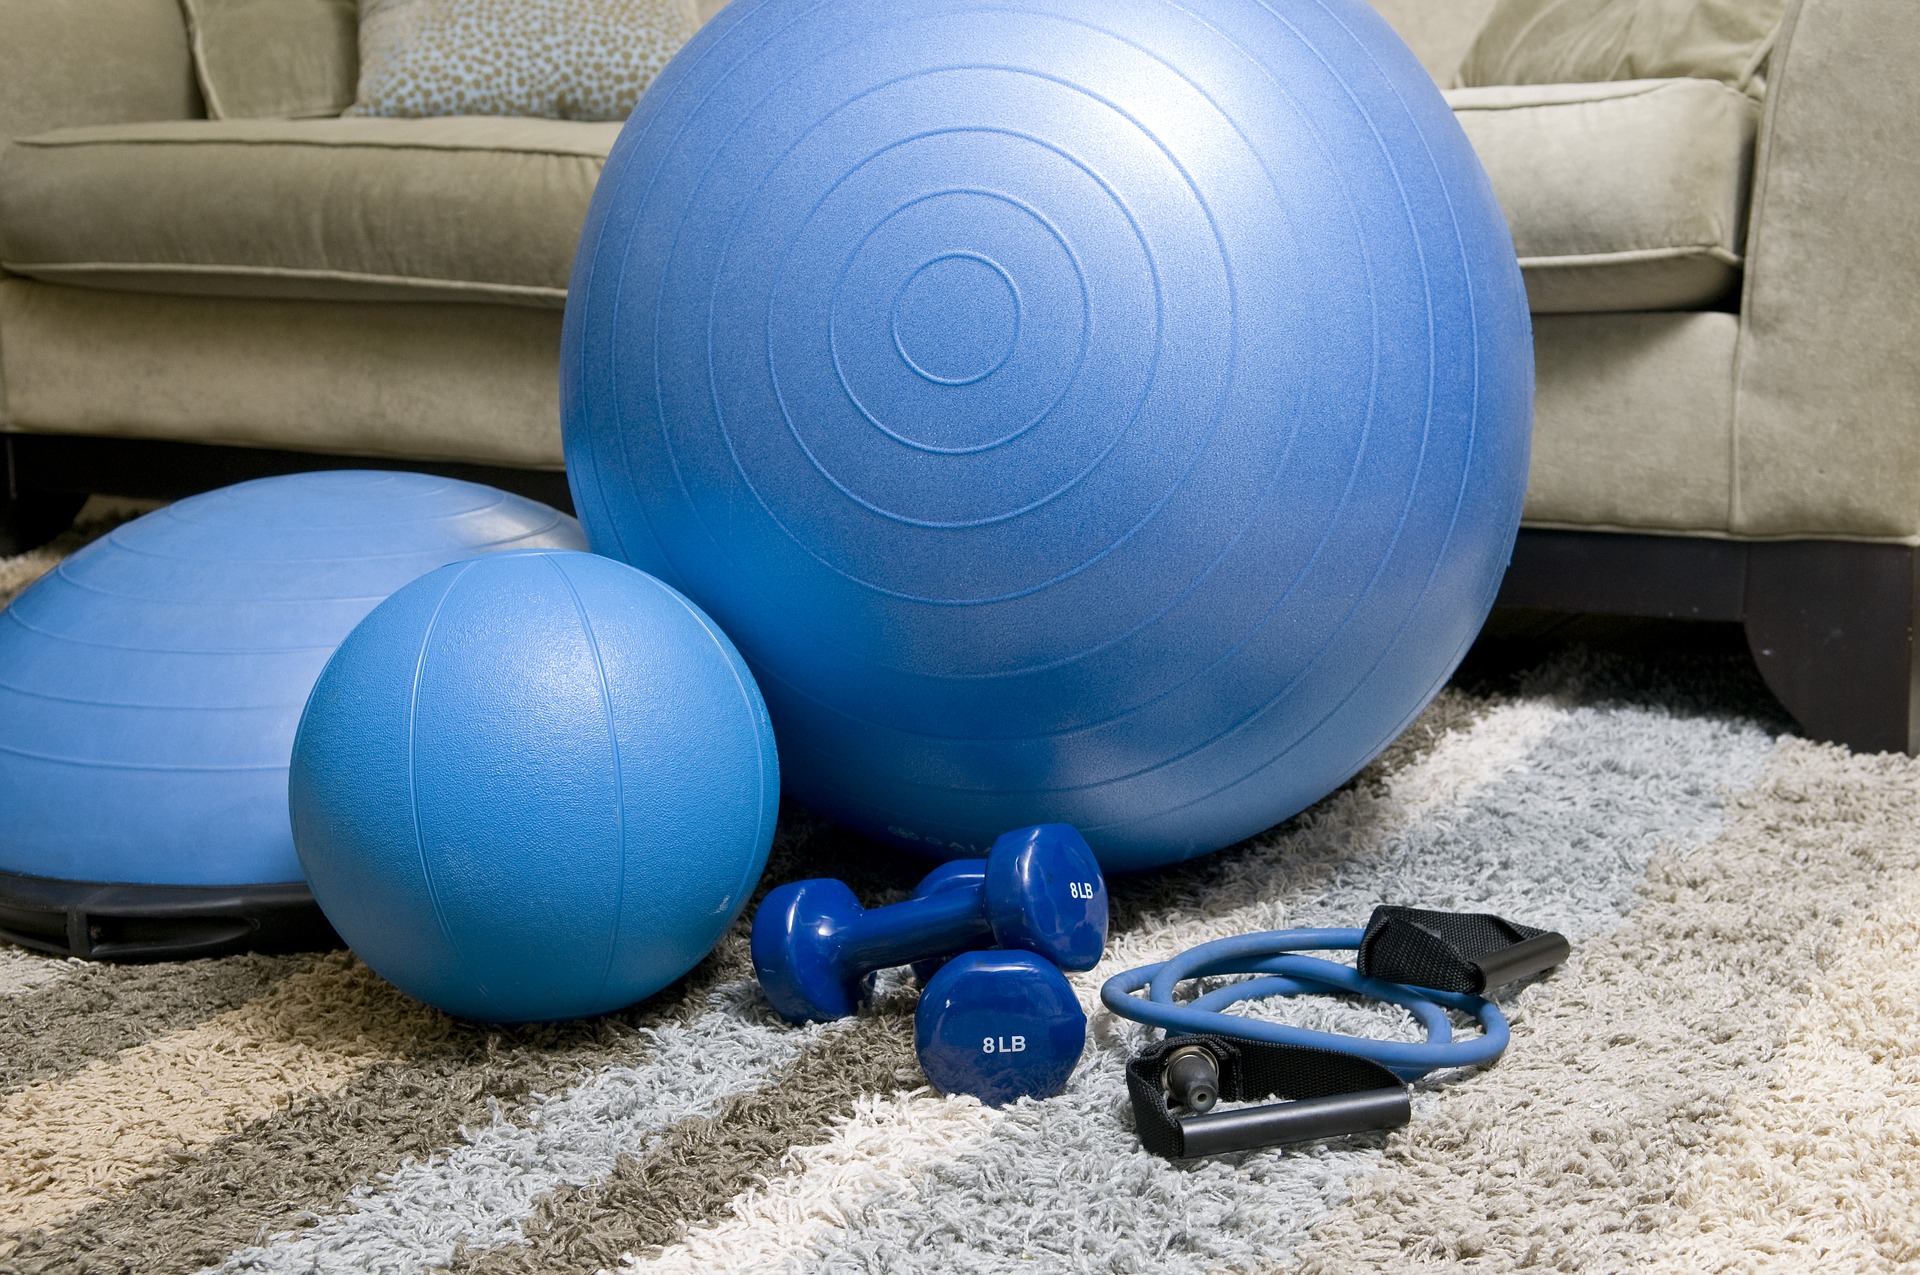 The Ultimate Guide to Setting up a Home Gym Without Going Broke